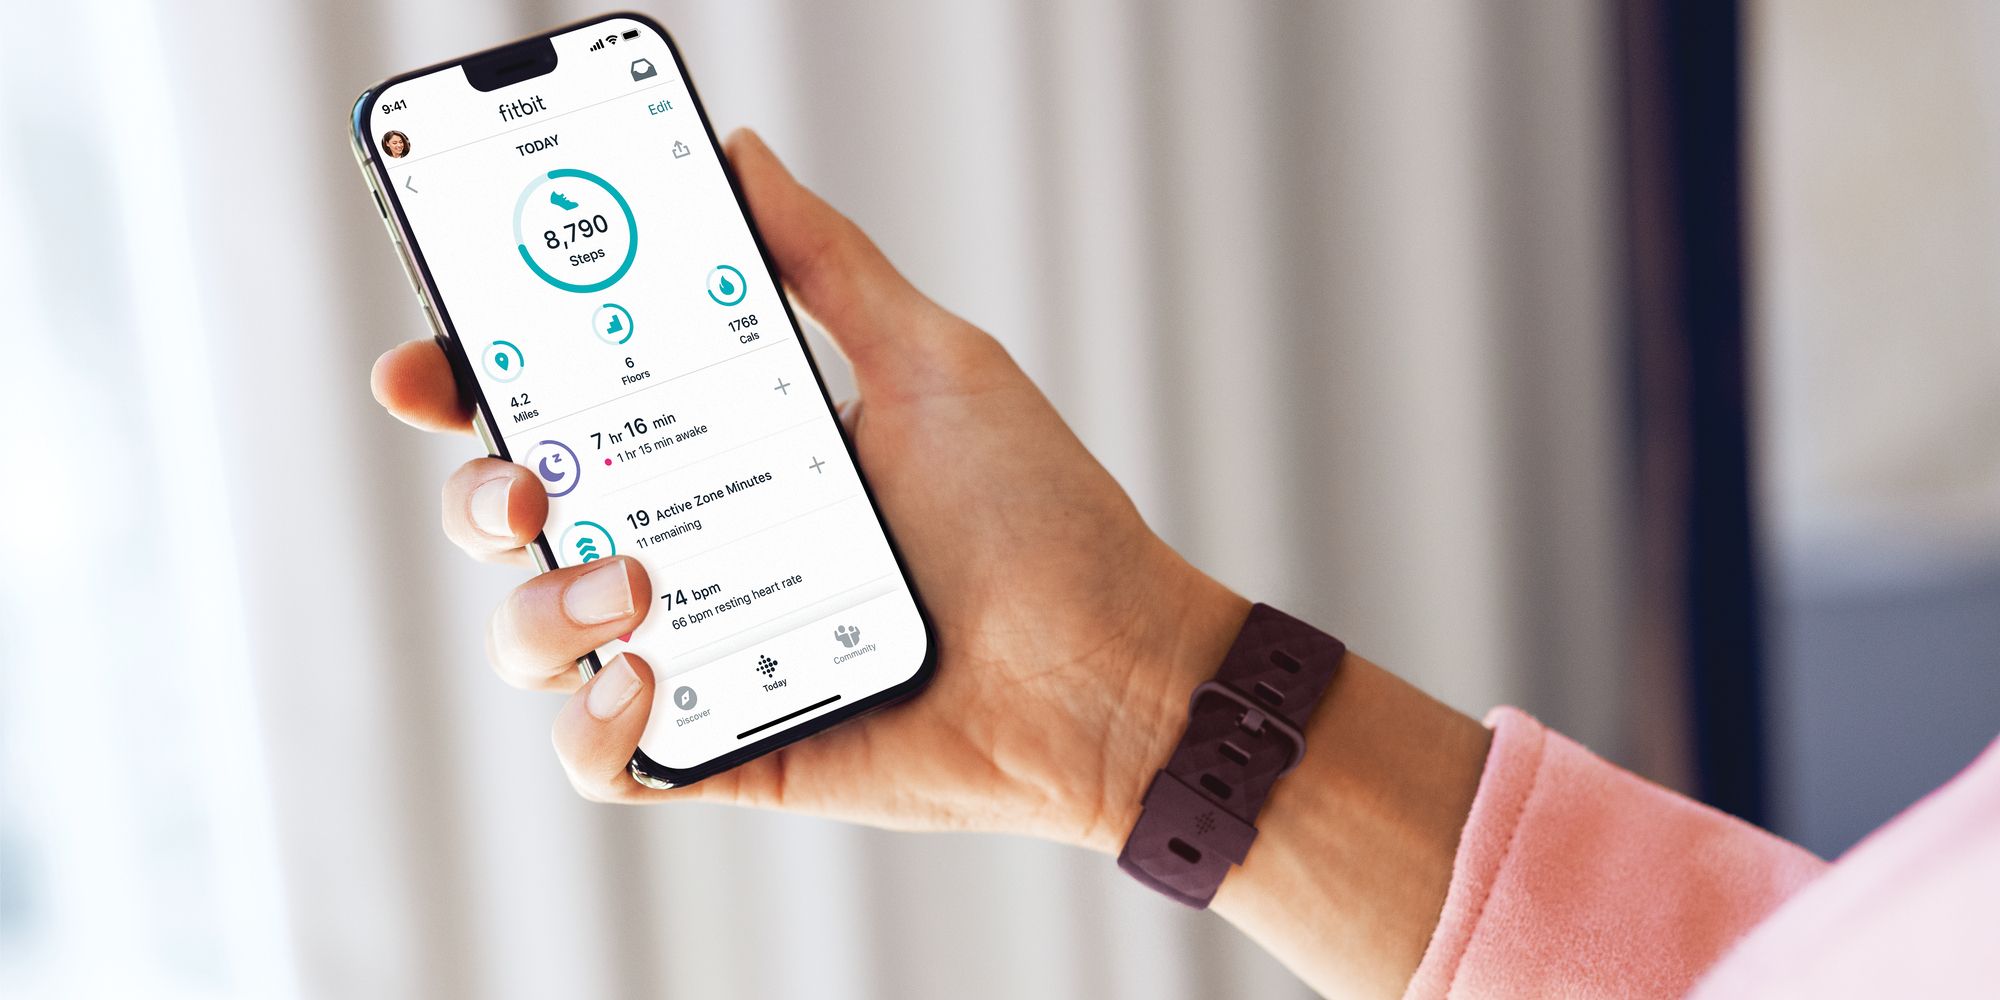 The Fitbit Charge 4 and its companion mobile app